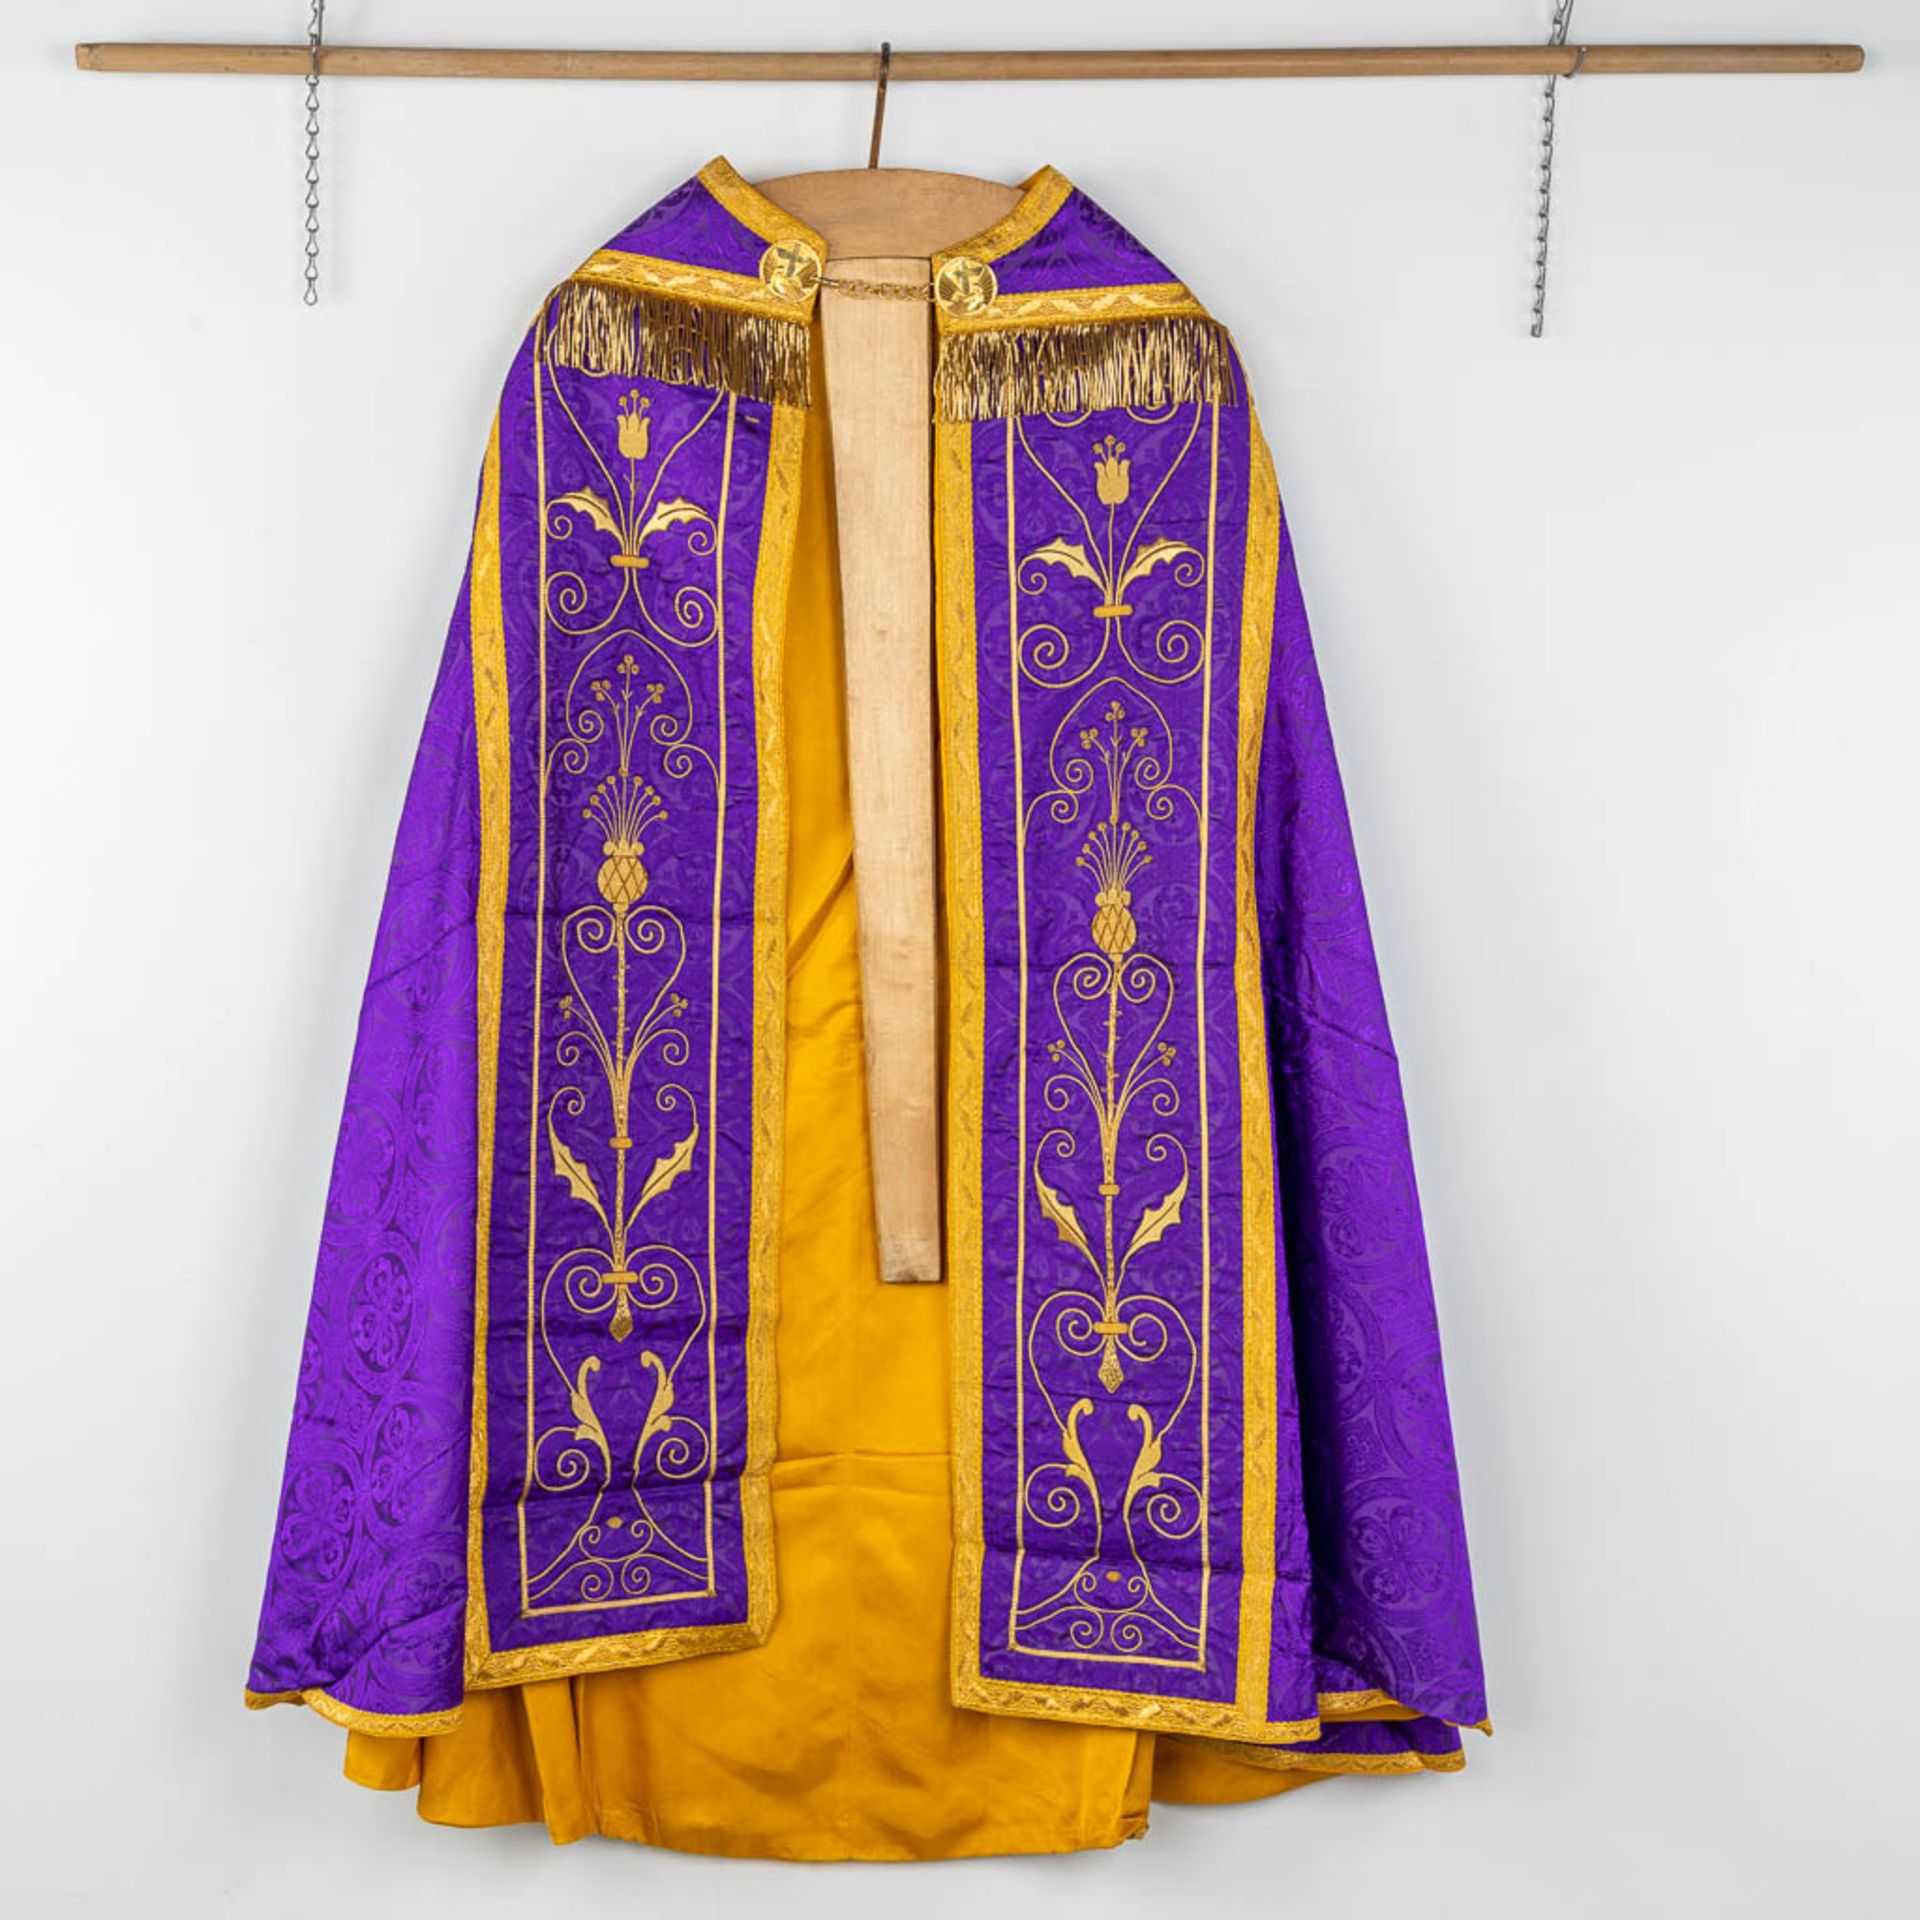 A Cope and Humeral Veil, finished with thick gold thread and purple fabric and the IHS logo. - Image 10 of 12